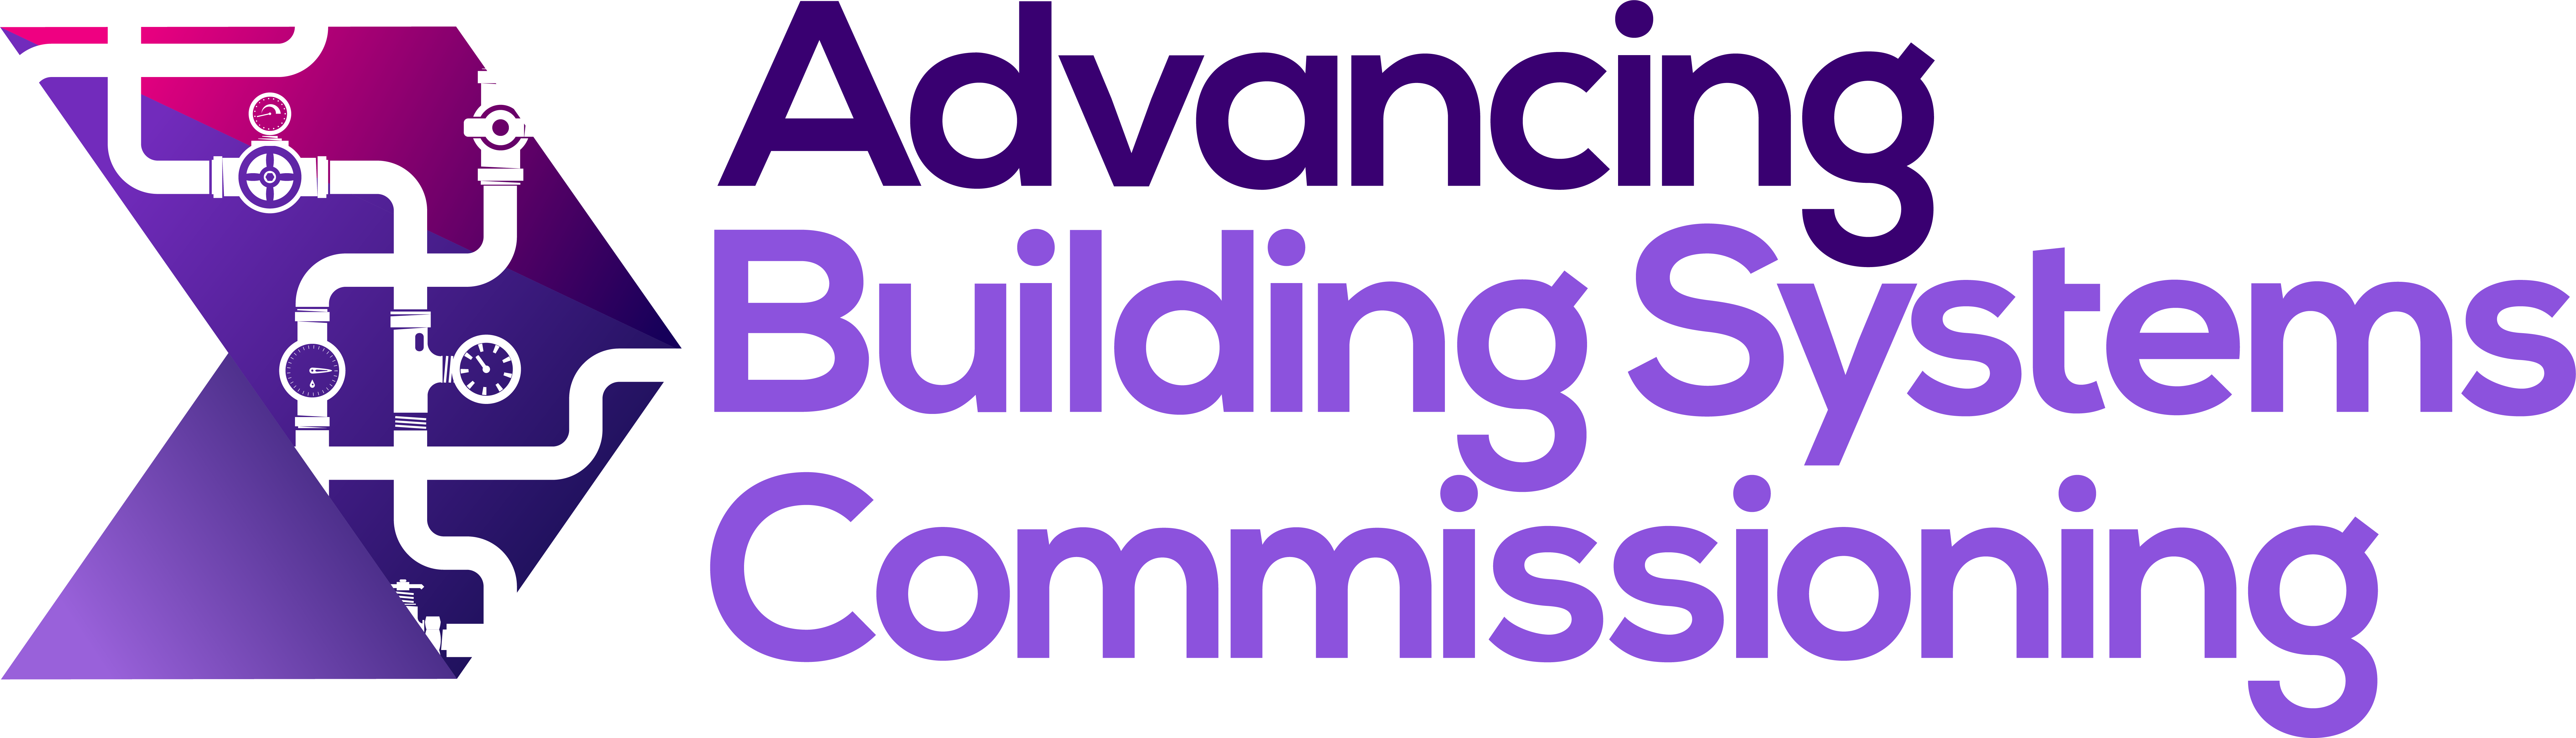 Advancing Building Systems Commissioning_COL